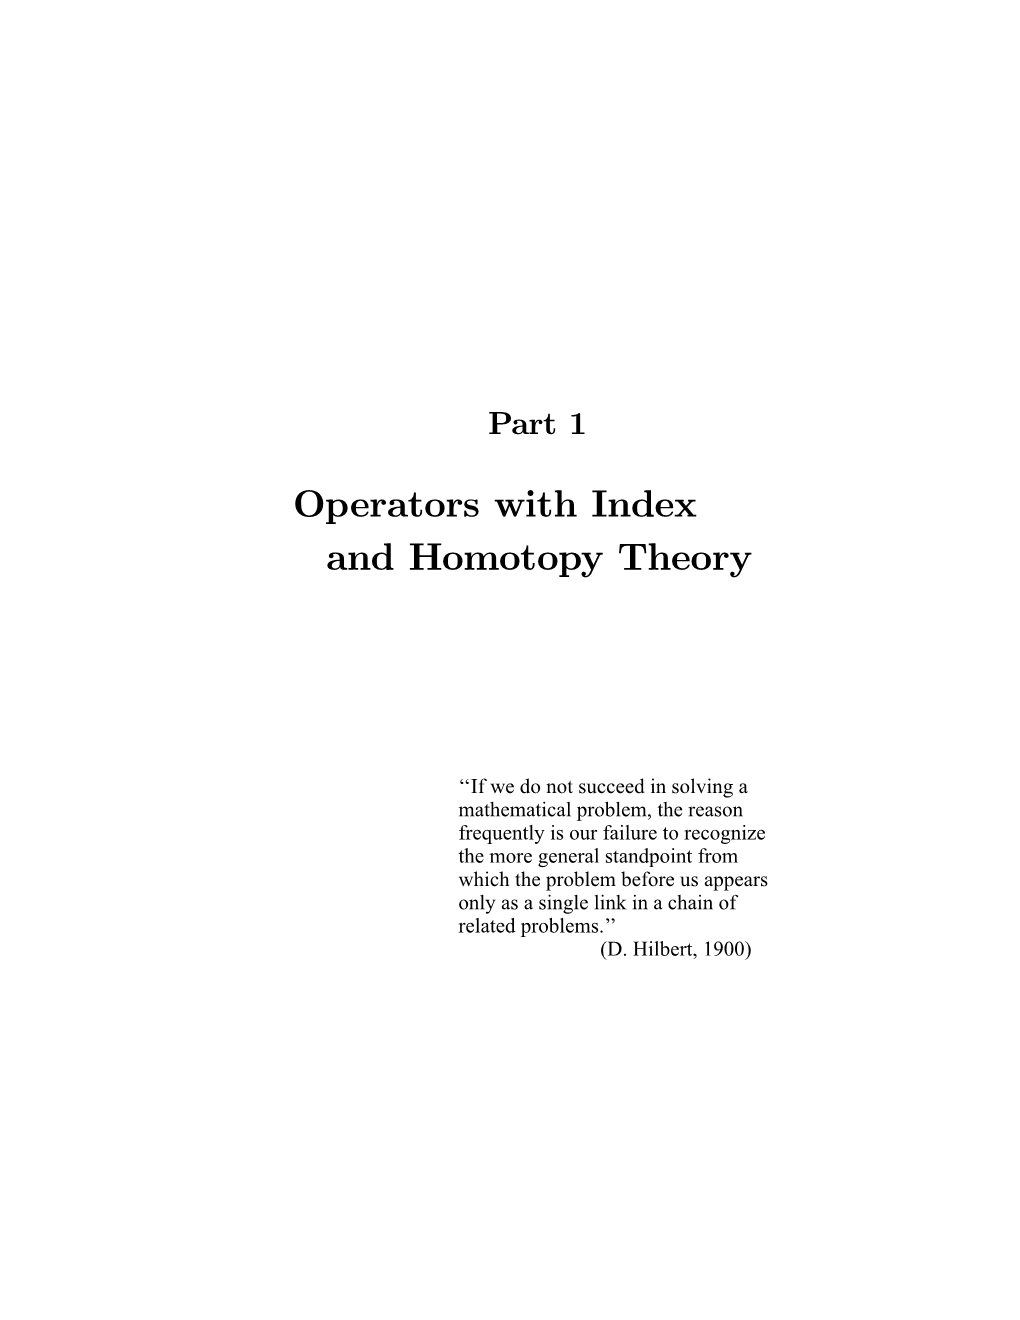 Operators with Index and Homotopy Theory